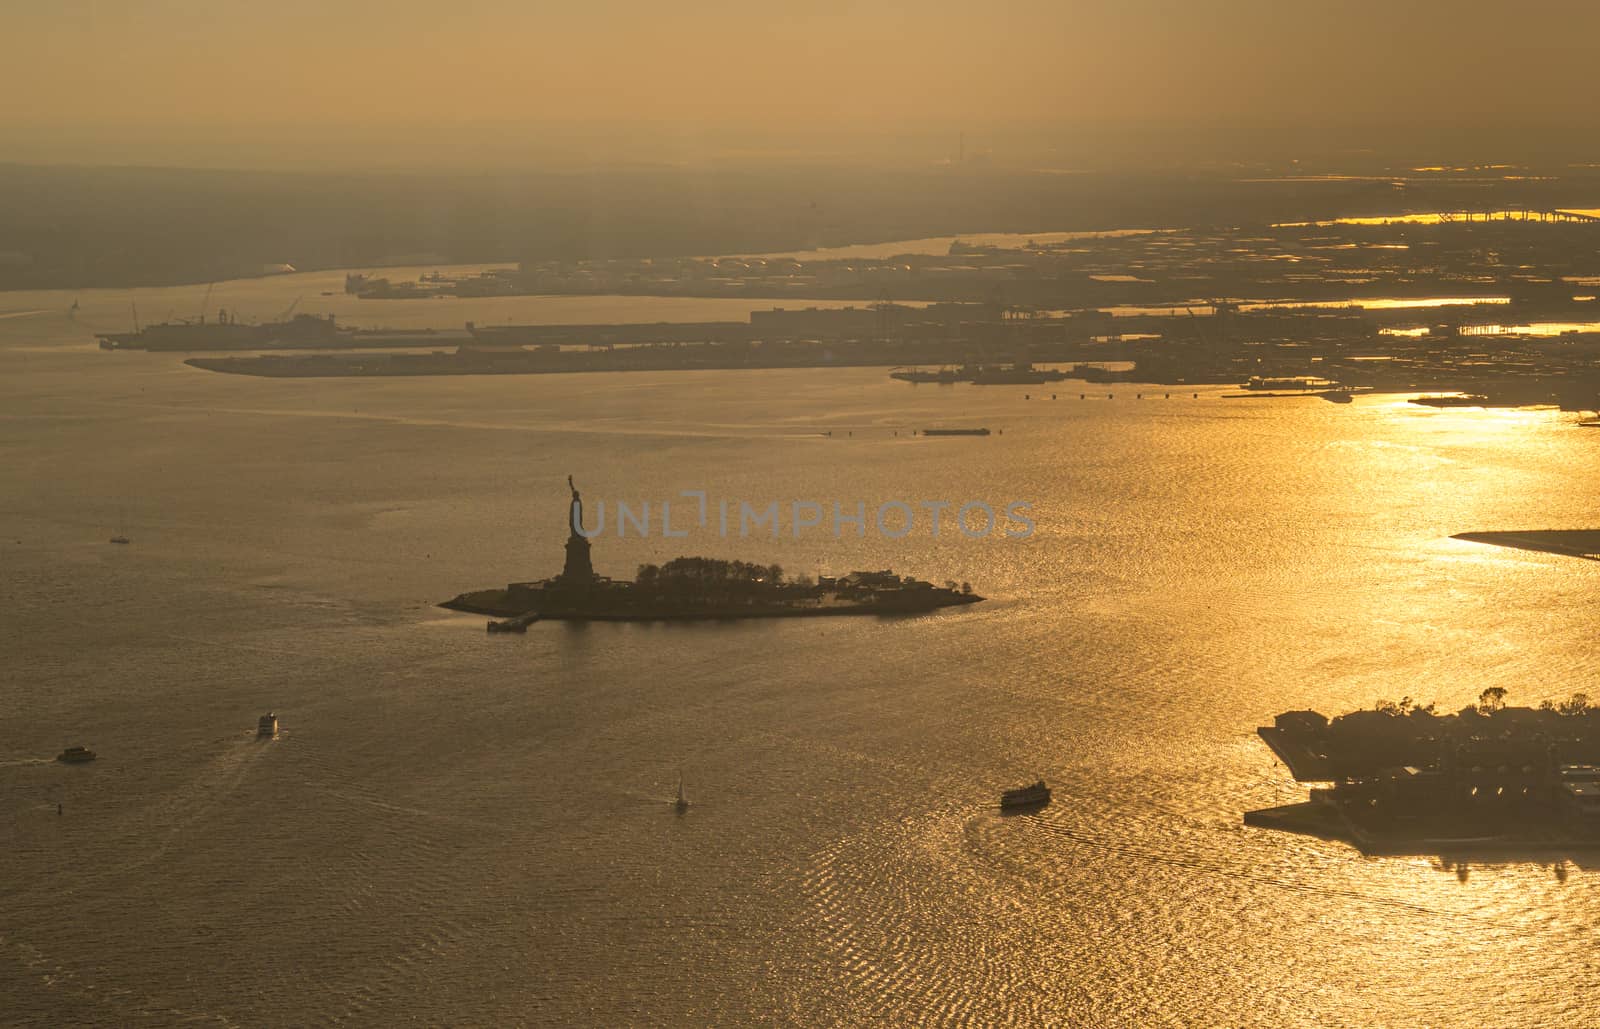 Liberty island and Statue of Liberty aerial photo at sunset or golden hour